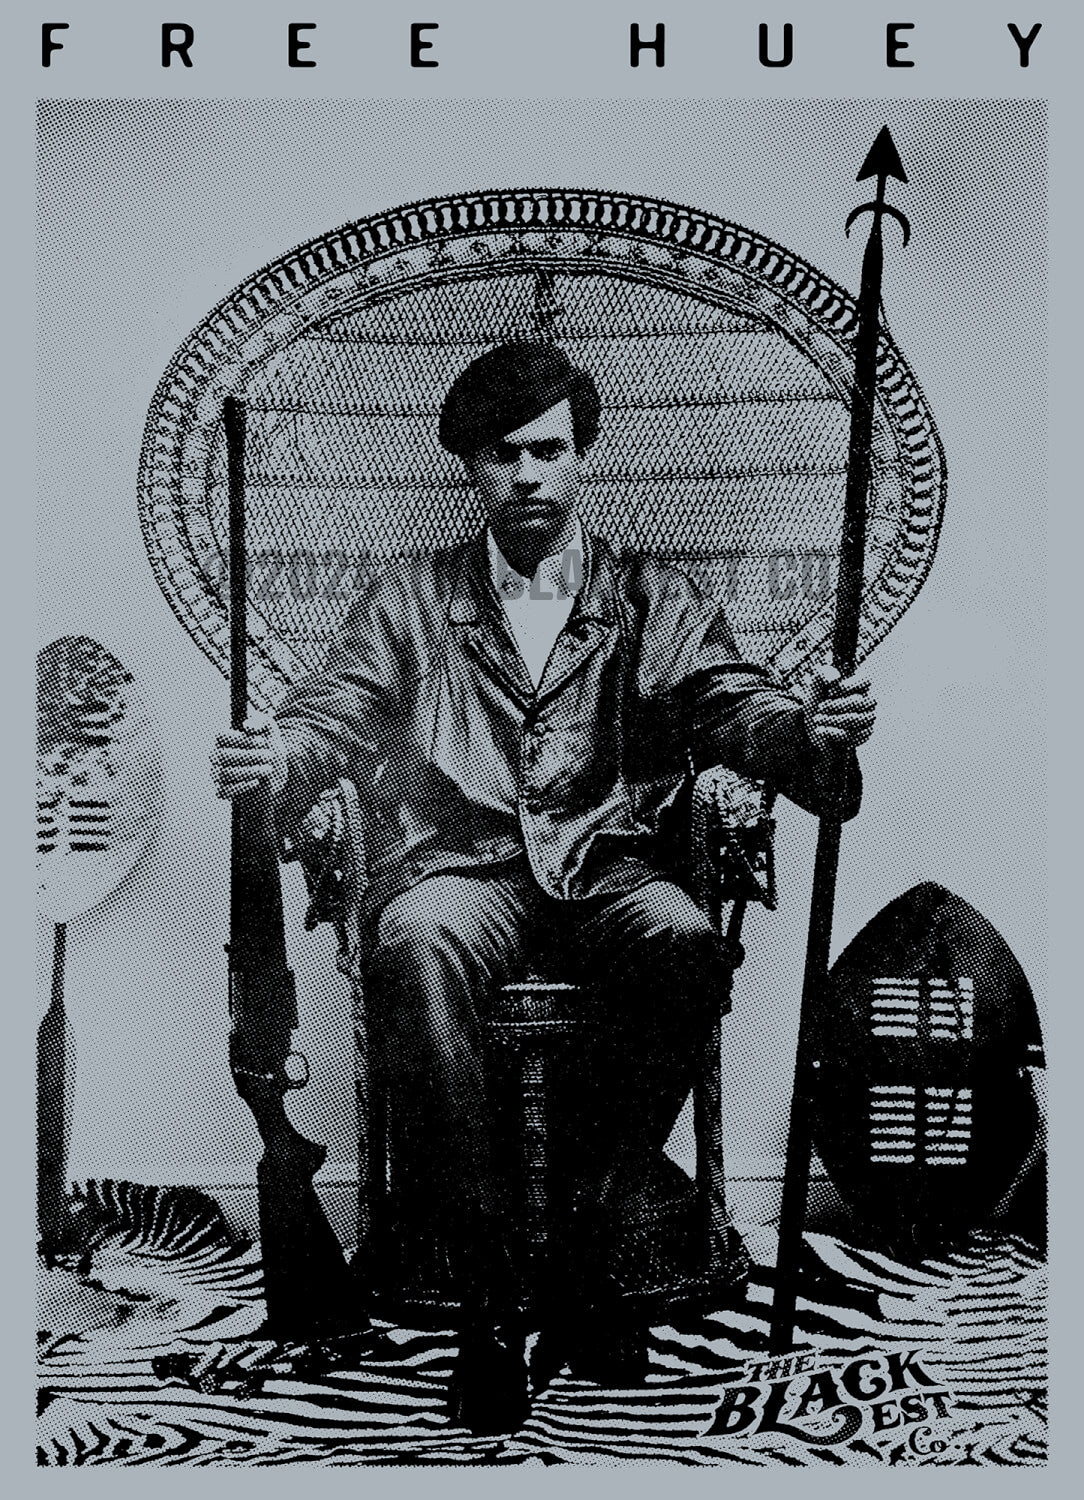 close up image of huey p newton sitting on a wicker chair